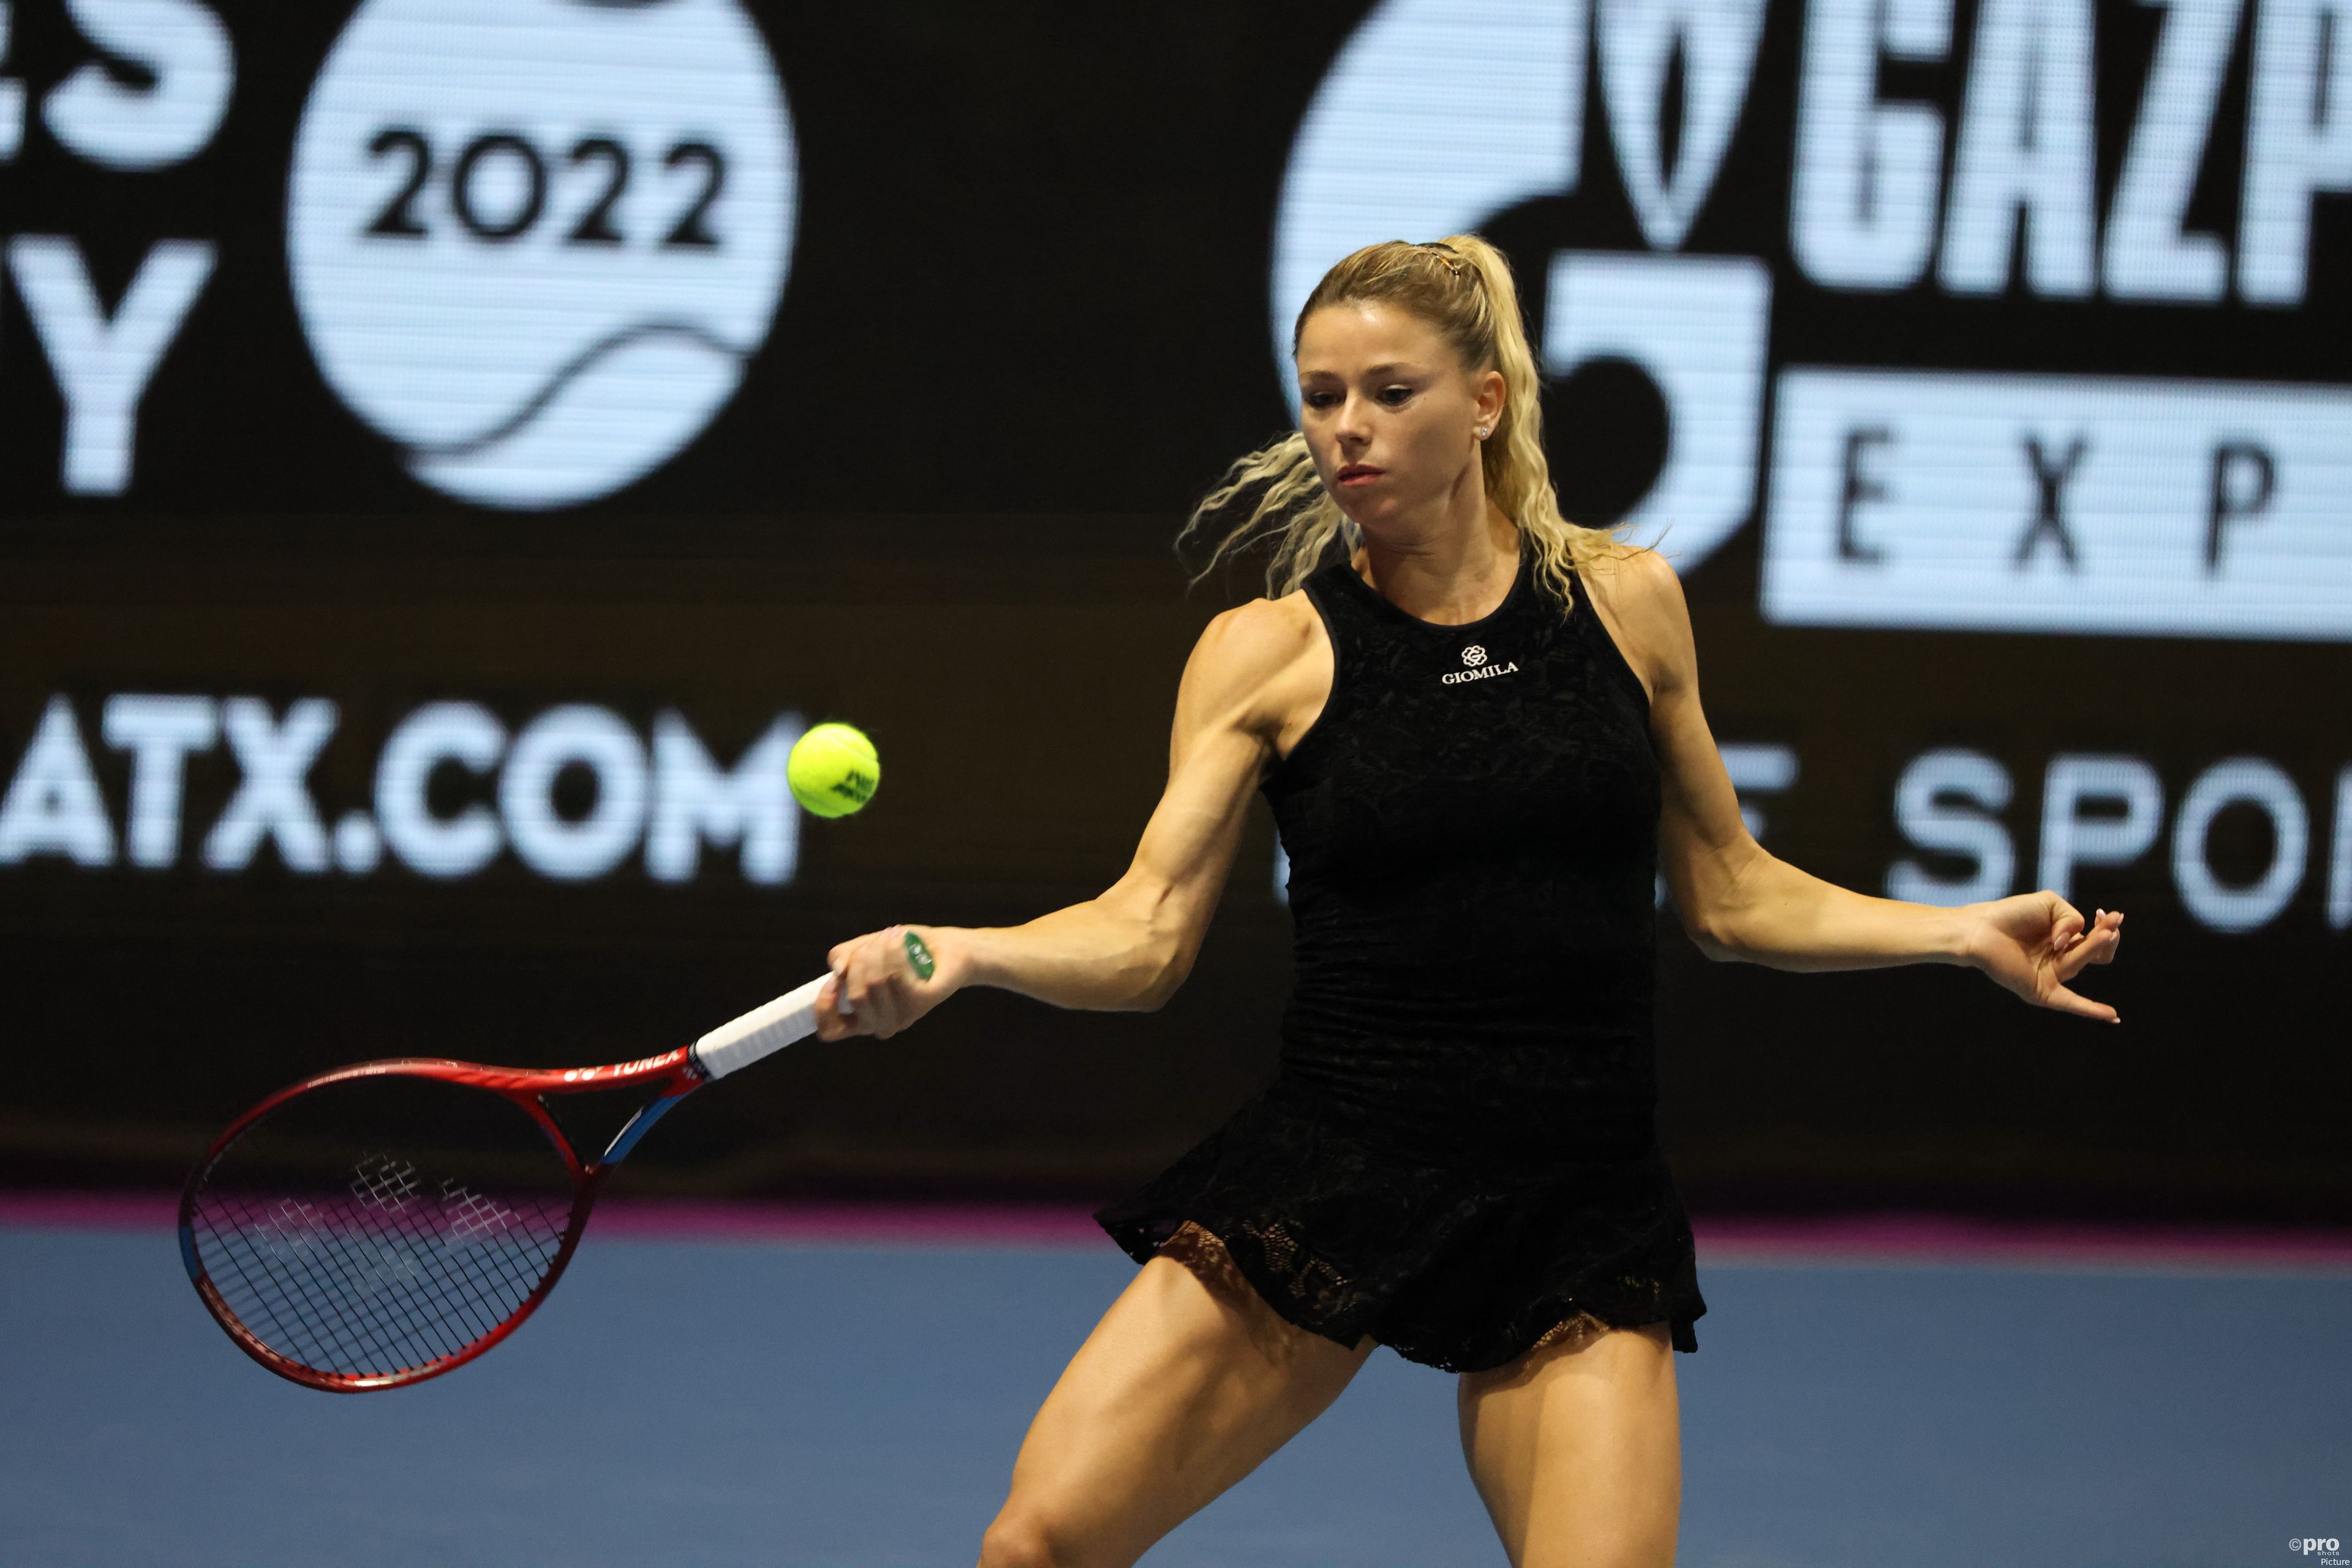 Camila Giorgi somewhat has faded into obscurity with her retirement announced not by her but the ITF.